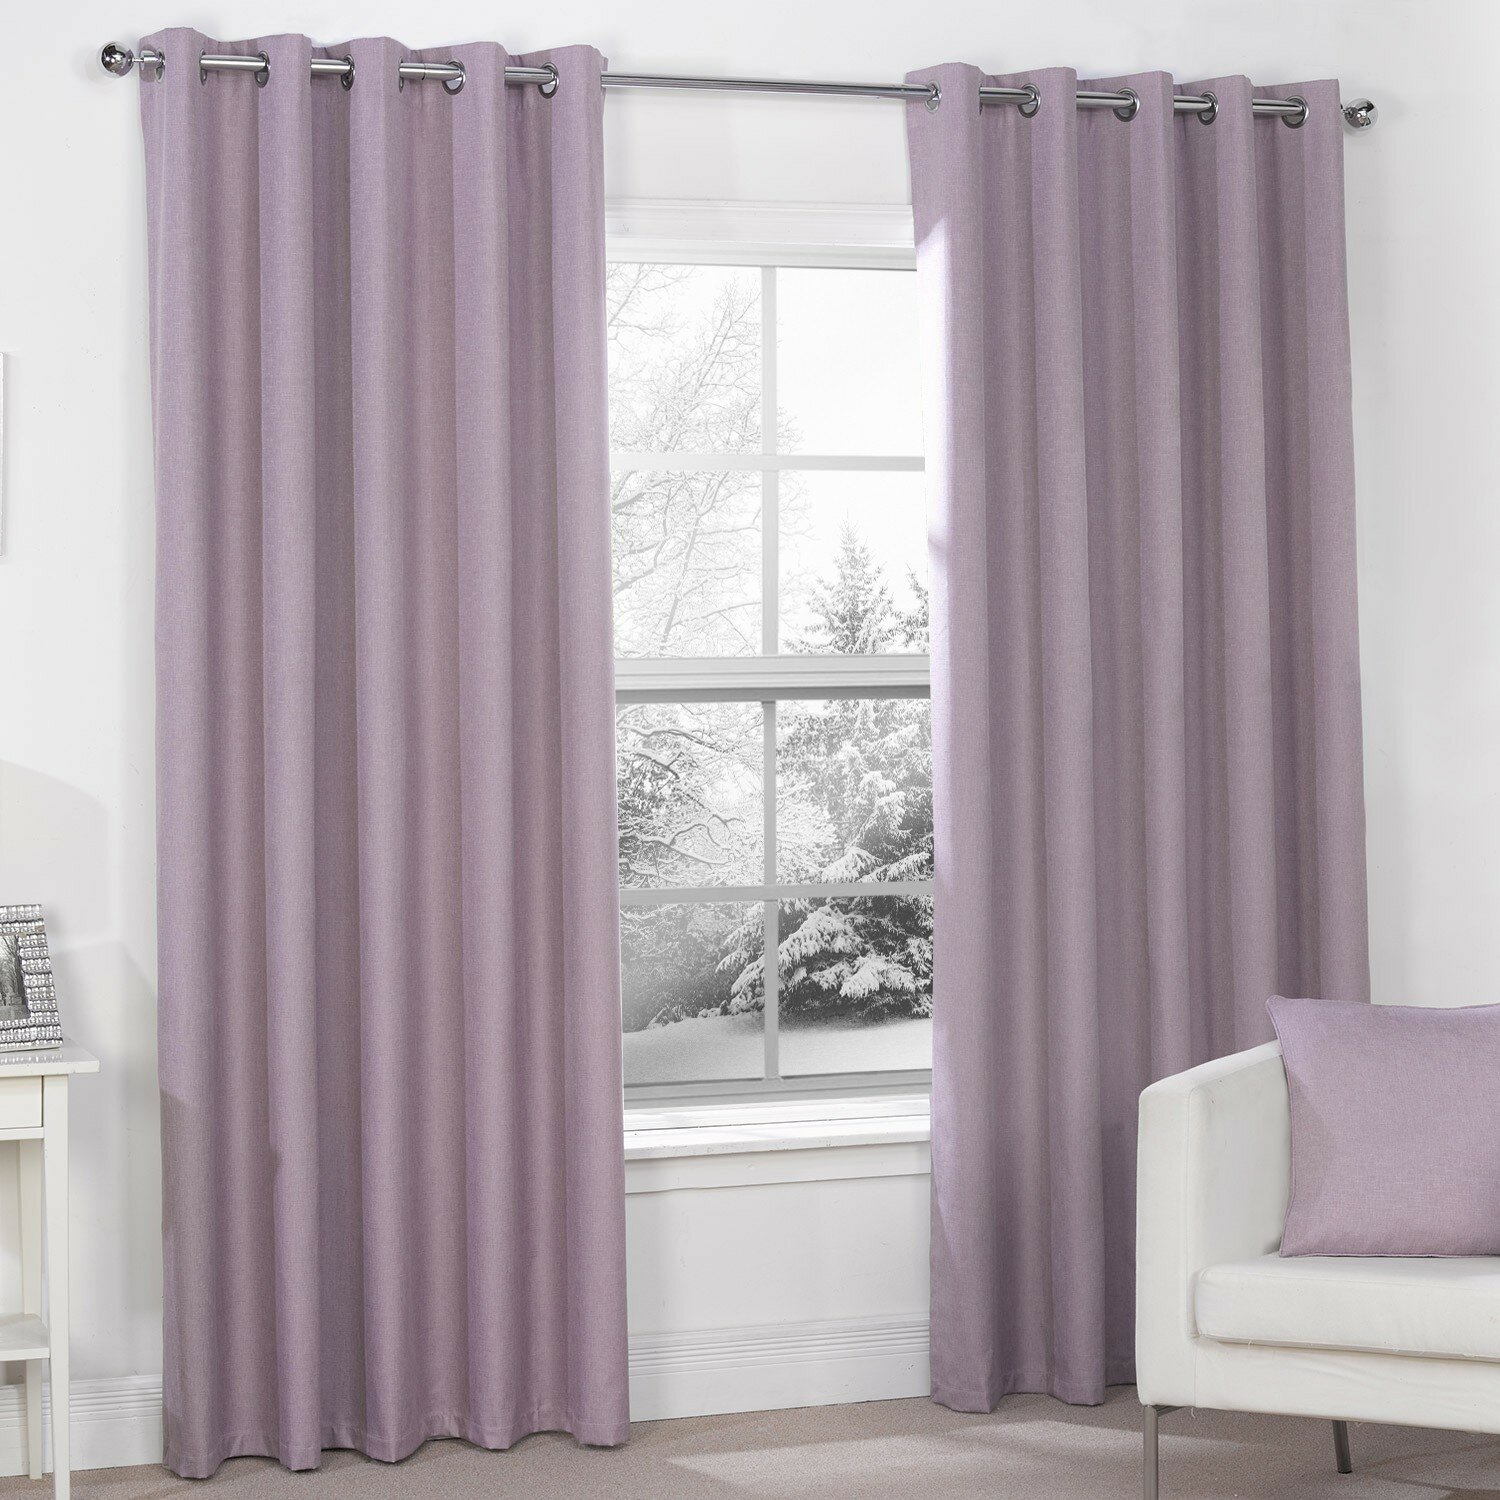 Cheap White Blackout Curtains | Where to Buy Blackout Curtains | Cheap Blackout Curtains